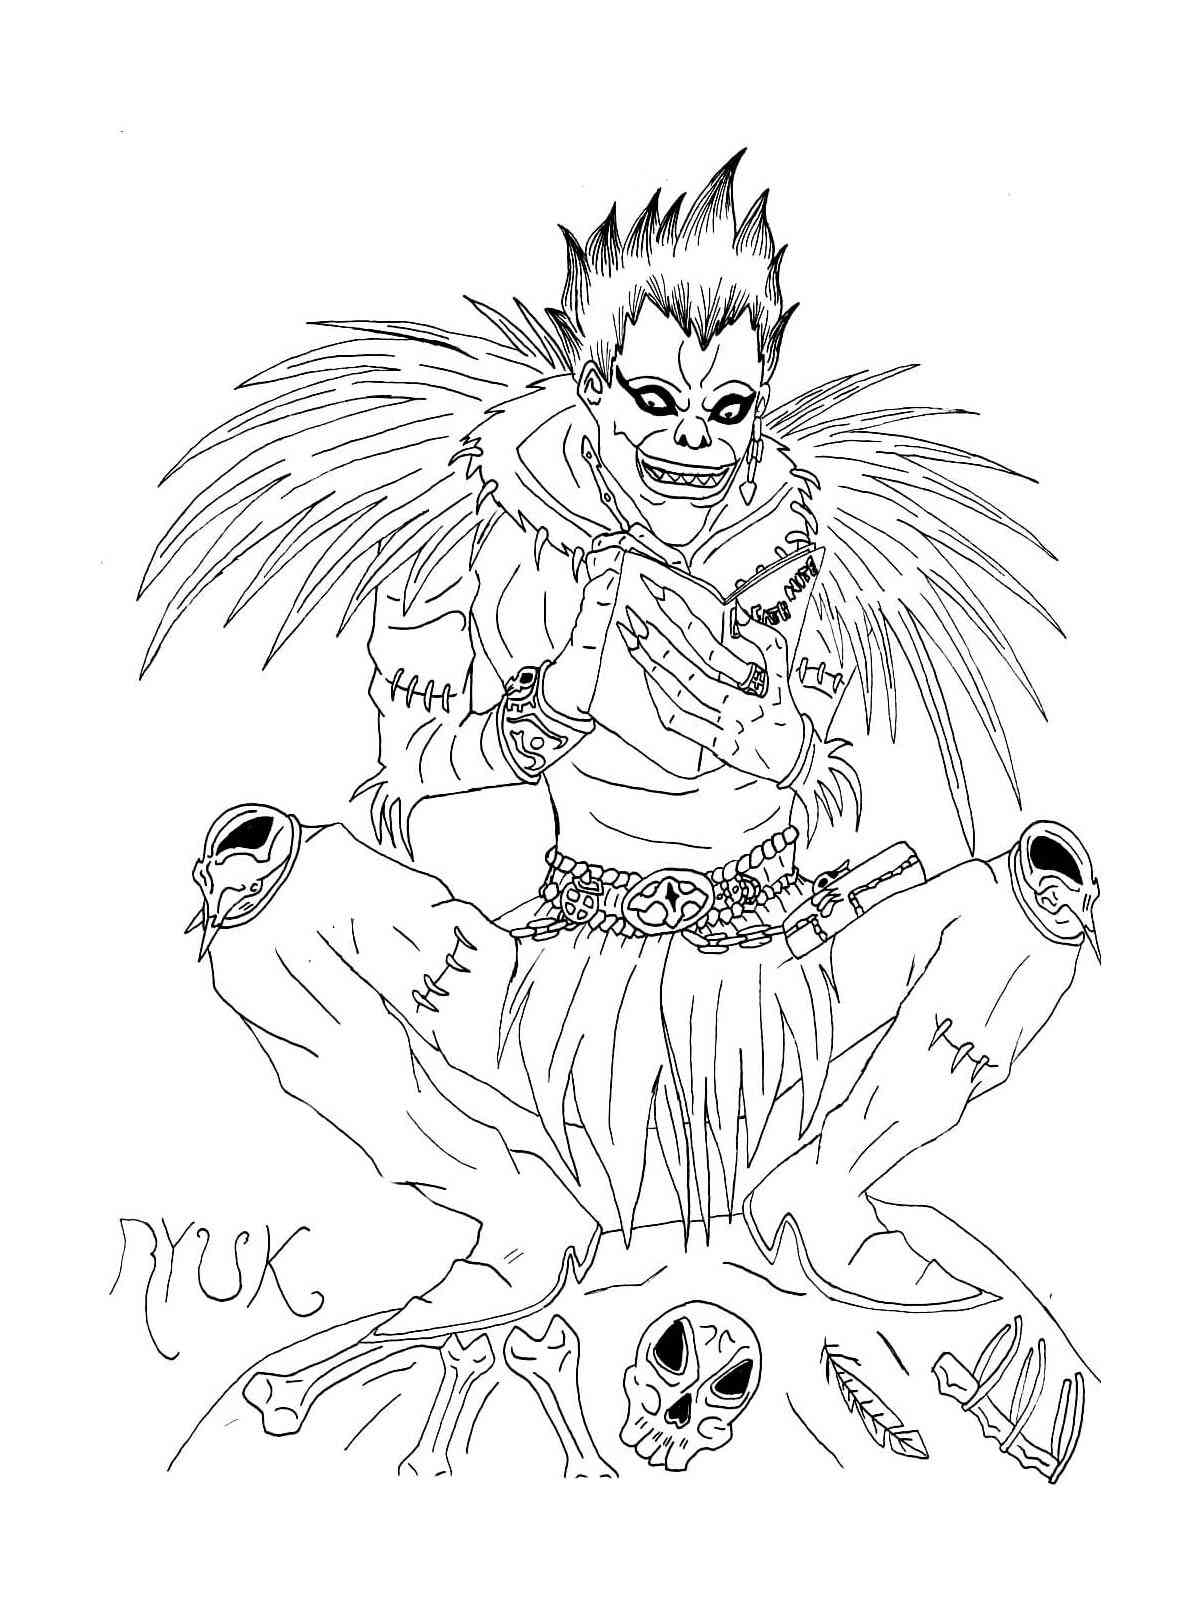 Ryuk with death note coloring page